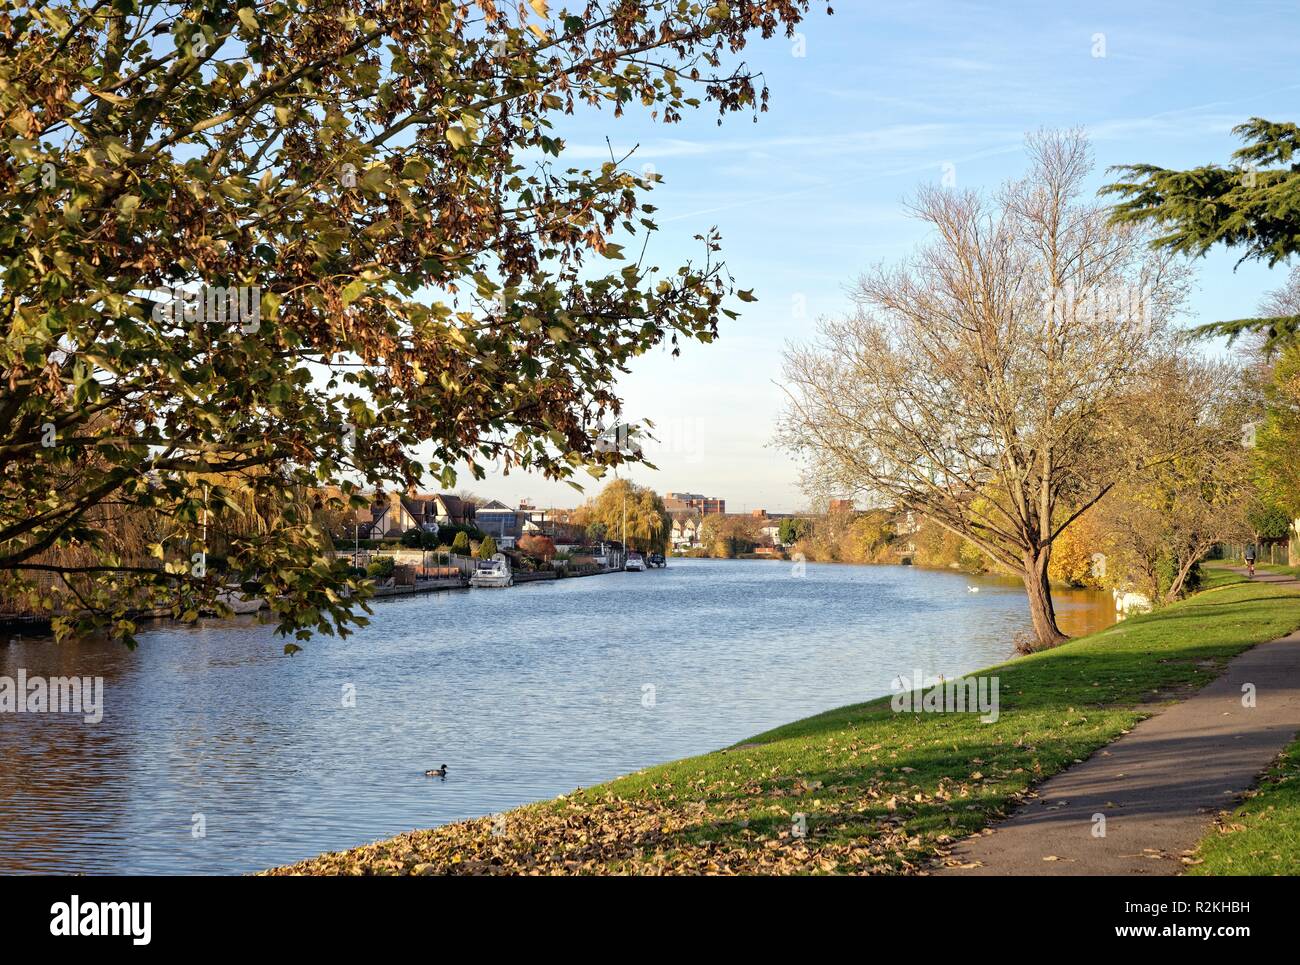 The River Thames and riverside on an autumn day, Staines-on-Thames Surrey England UK Stock Photo